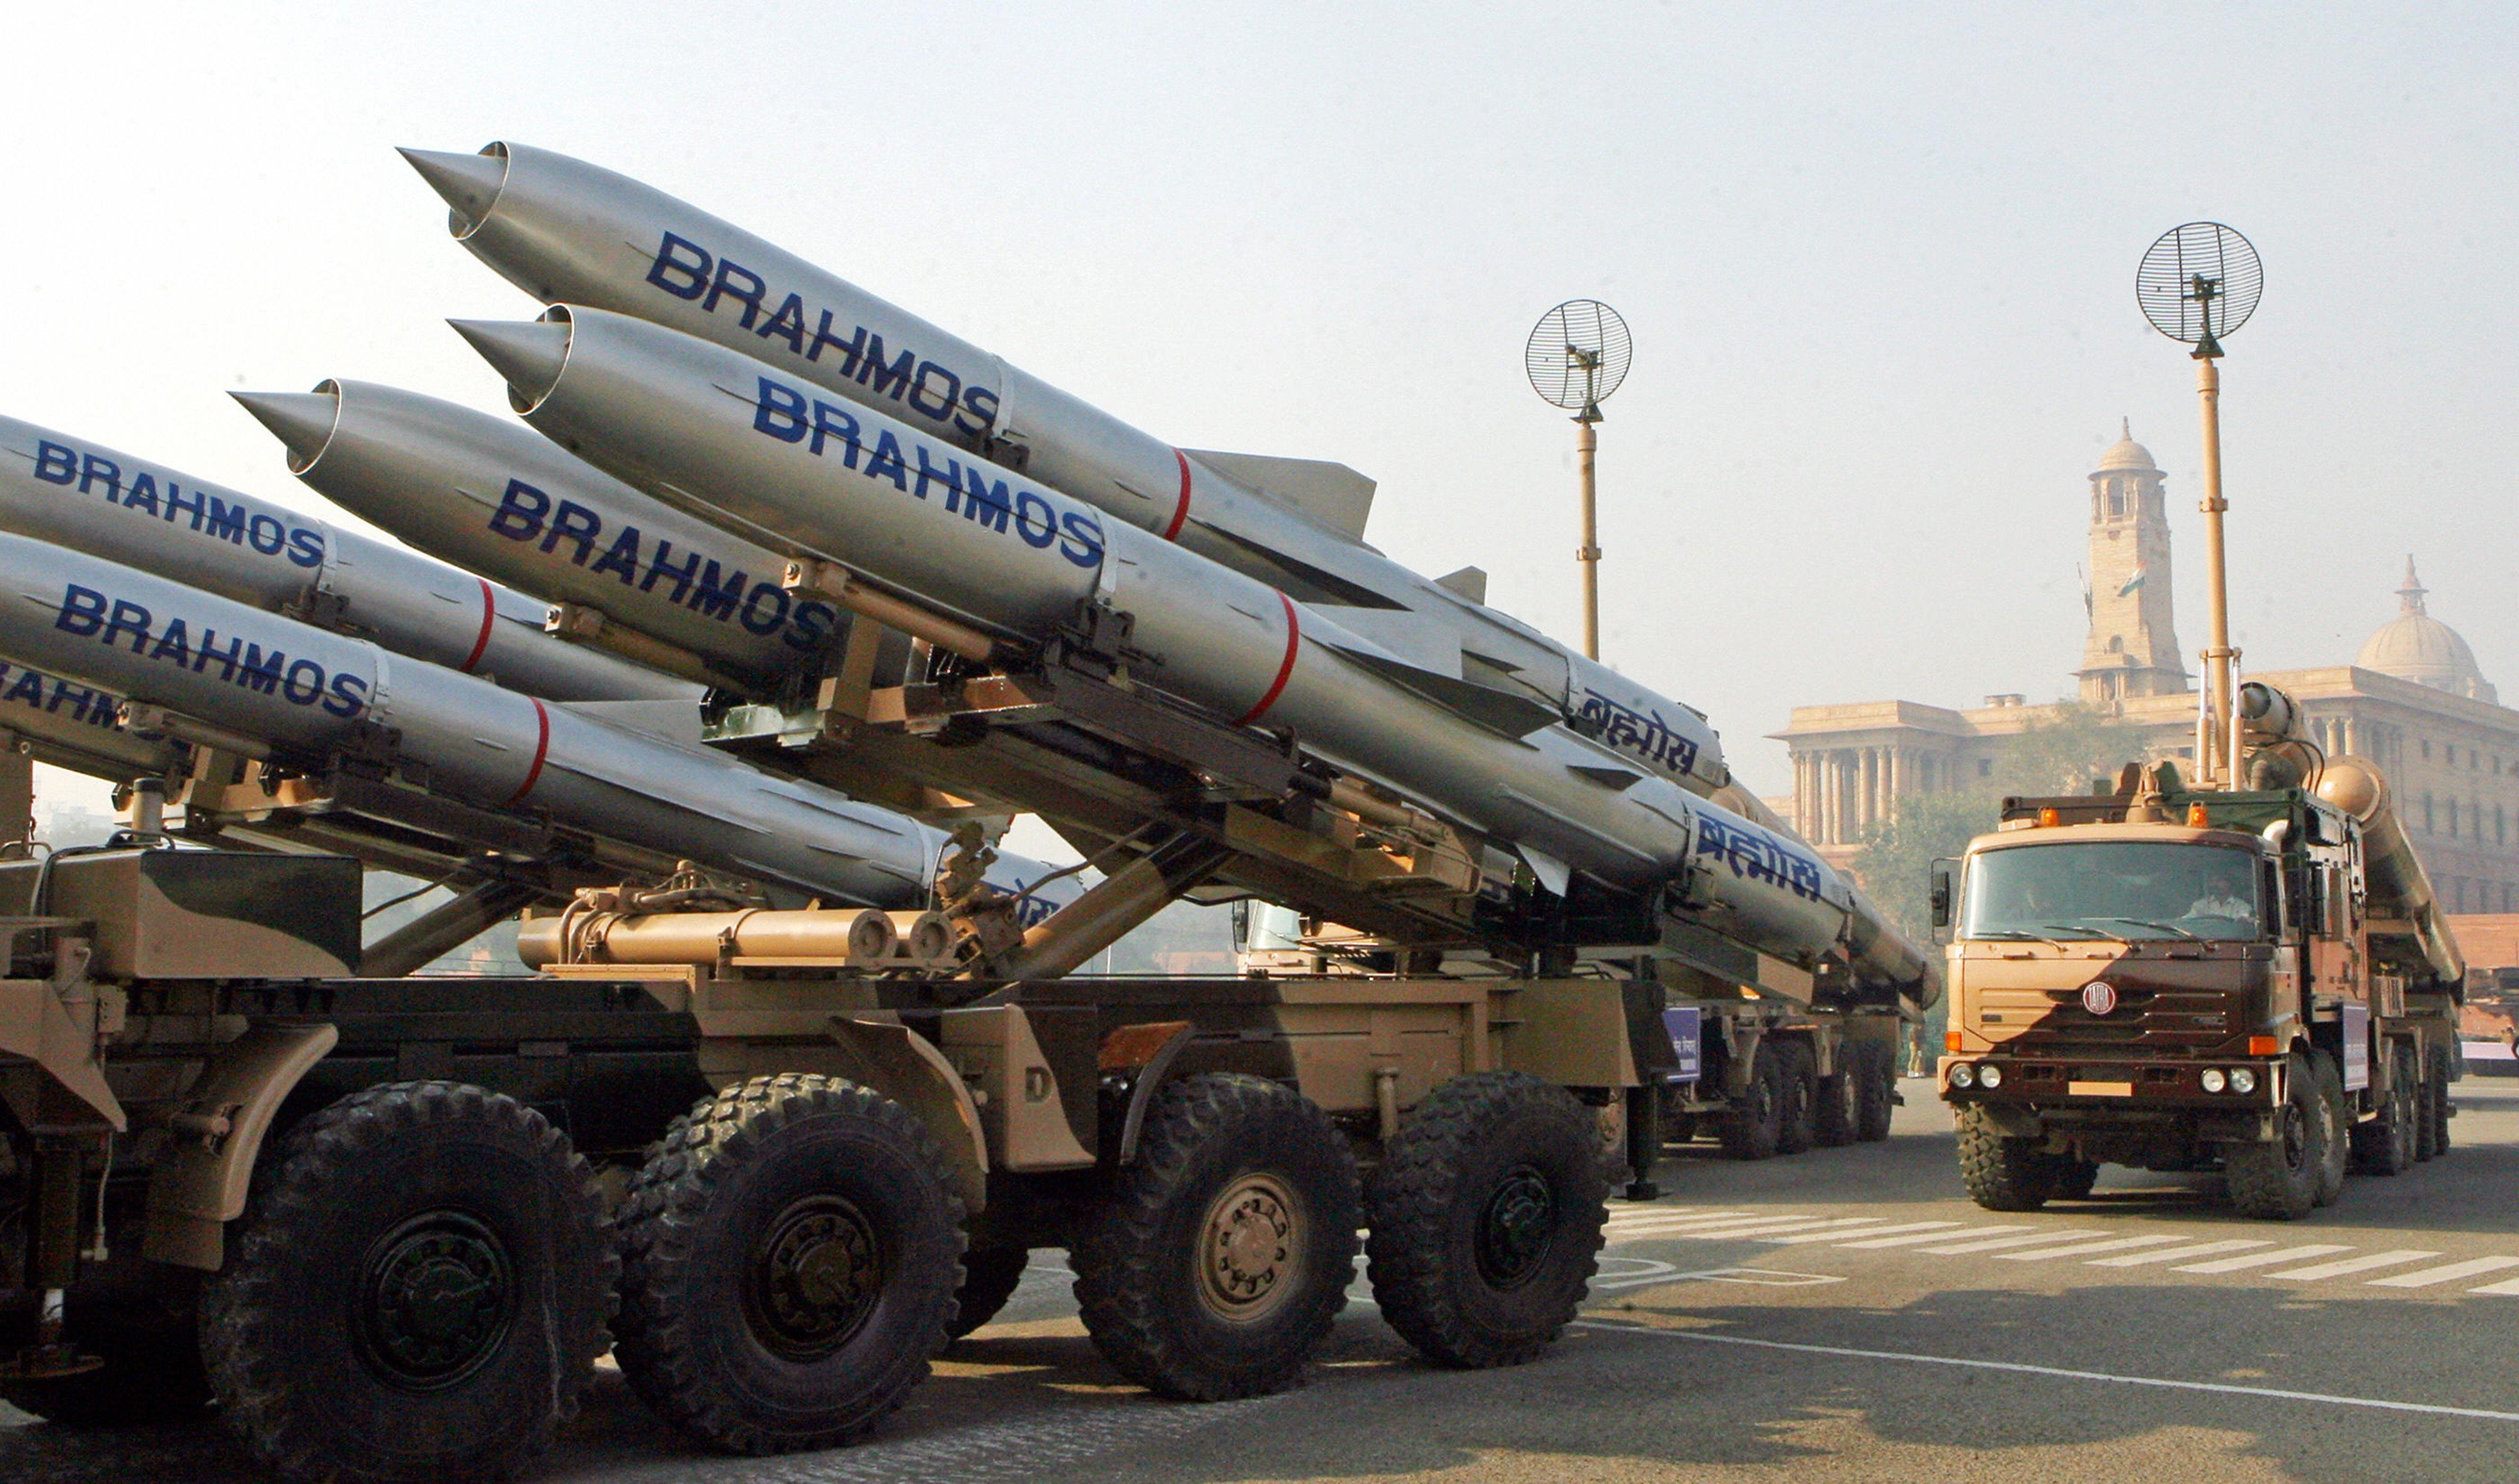 brahmos, Missile, India, Truck, Military, Army, War, Vehicle, 4000x2357 Wallpaper